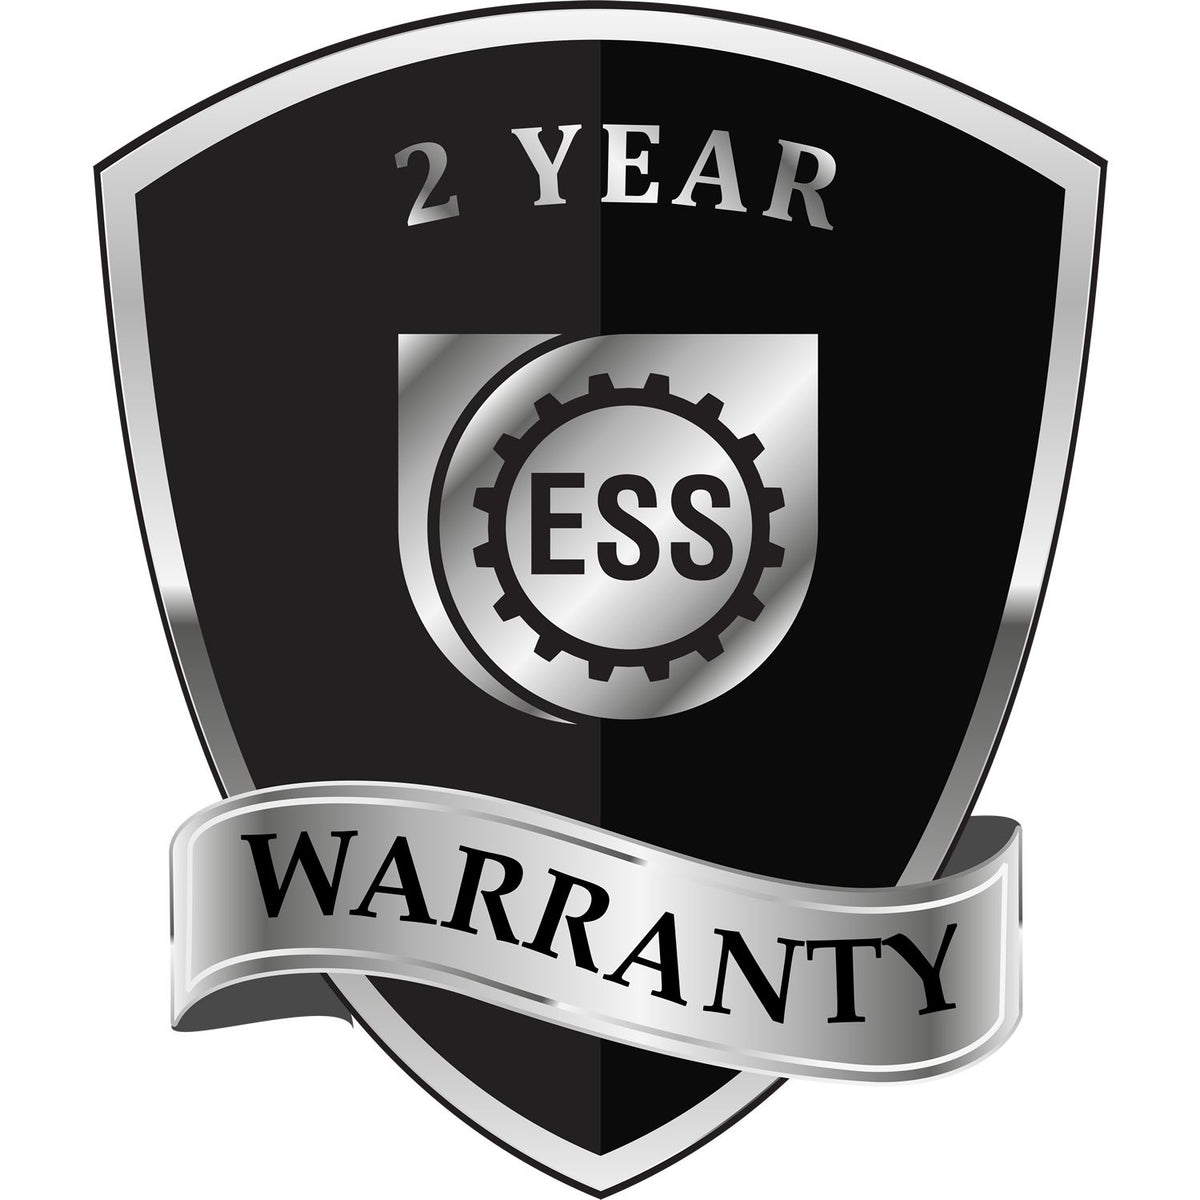 A black and silver badge or emblem showing warranty information for the Long Reach Massachusetts Geology Seal